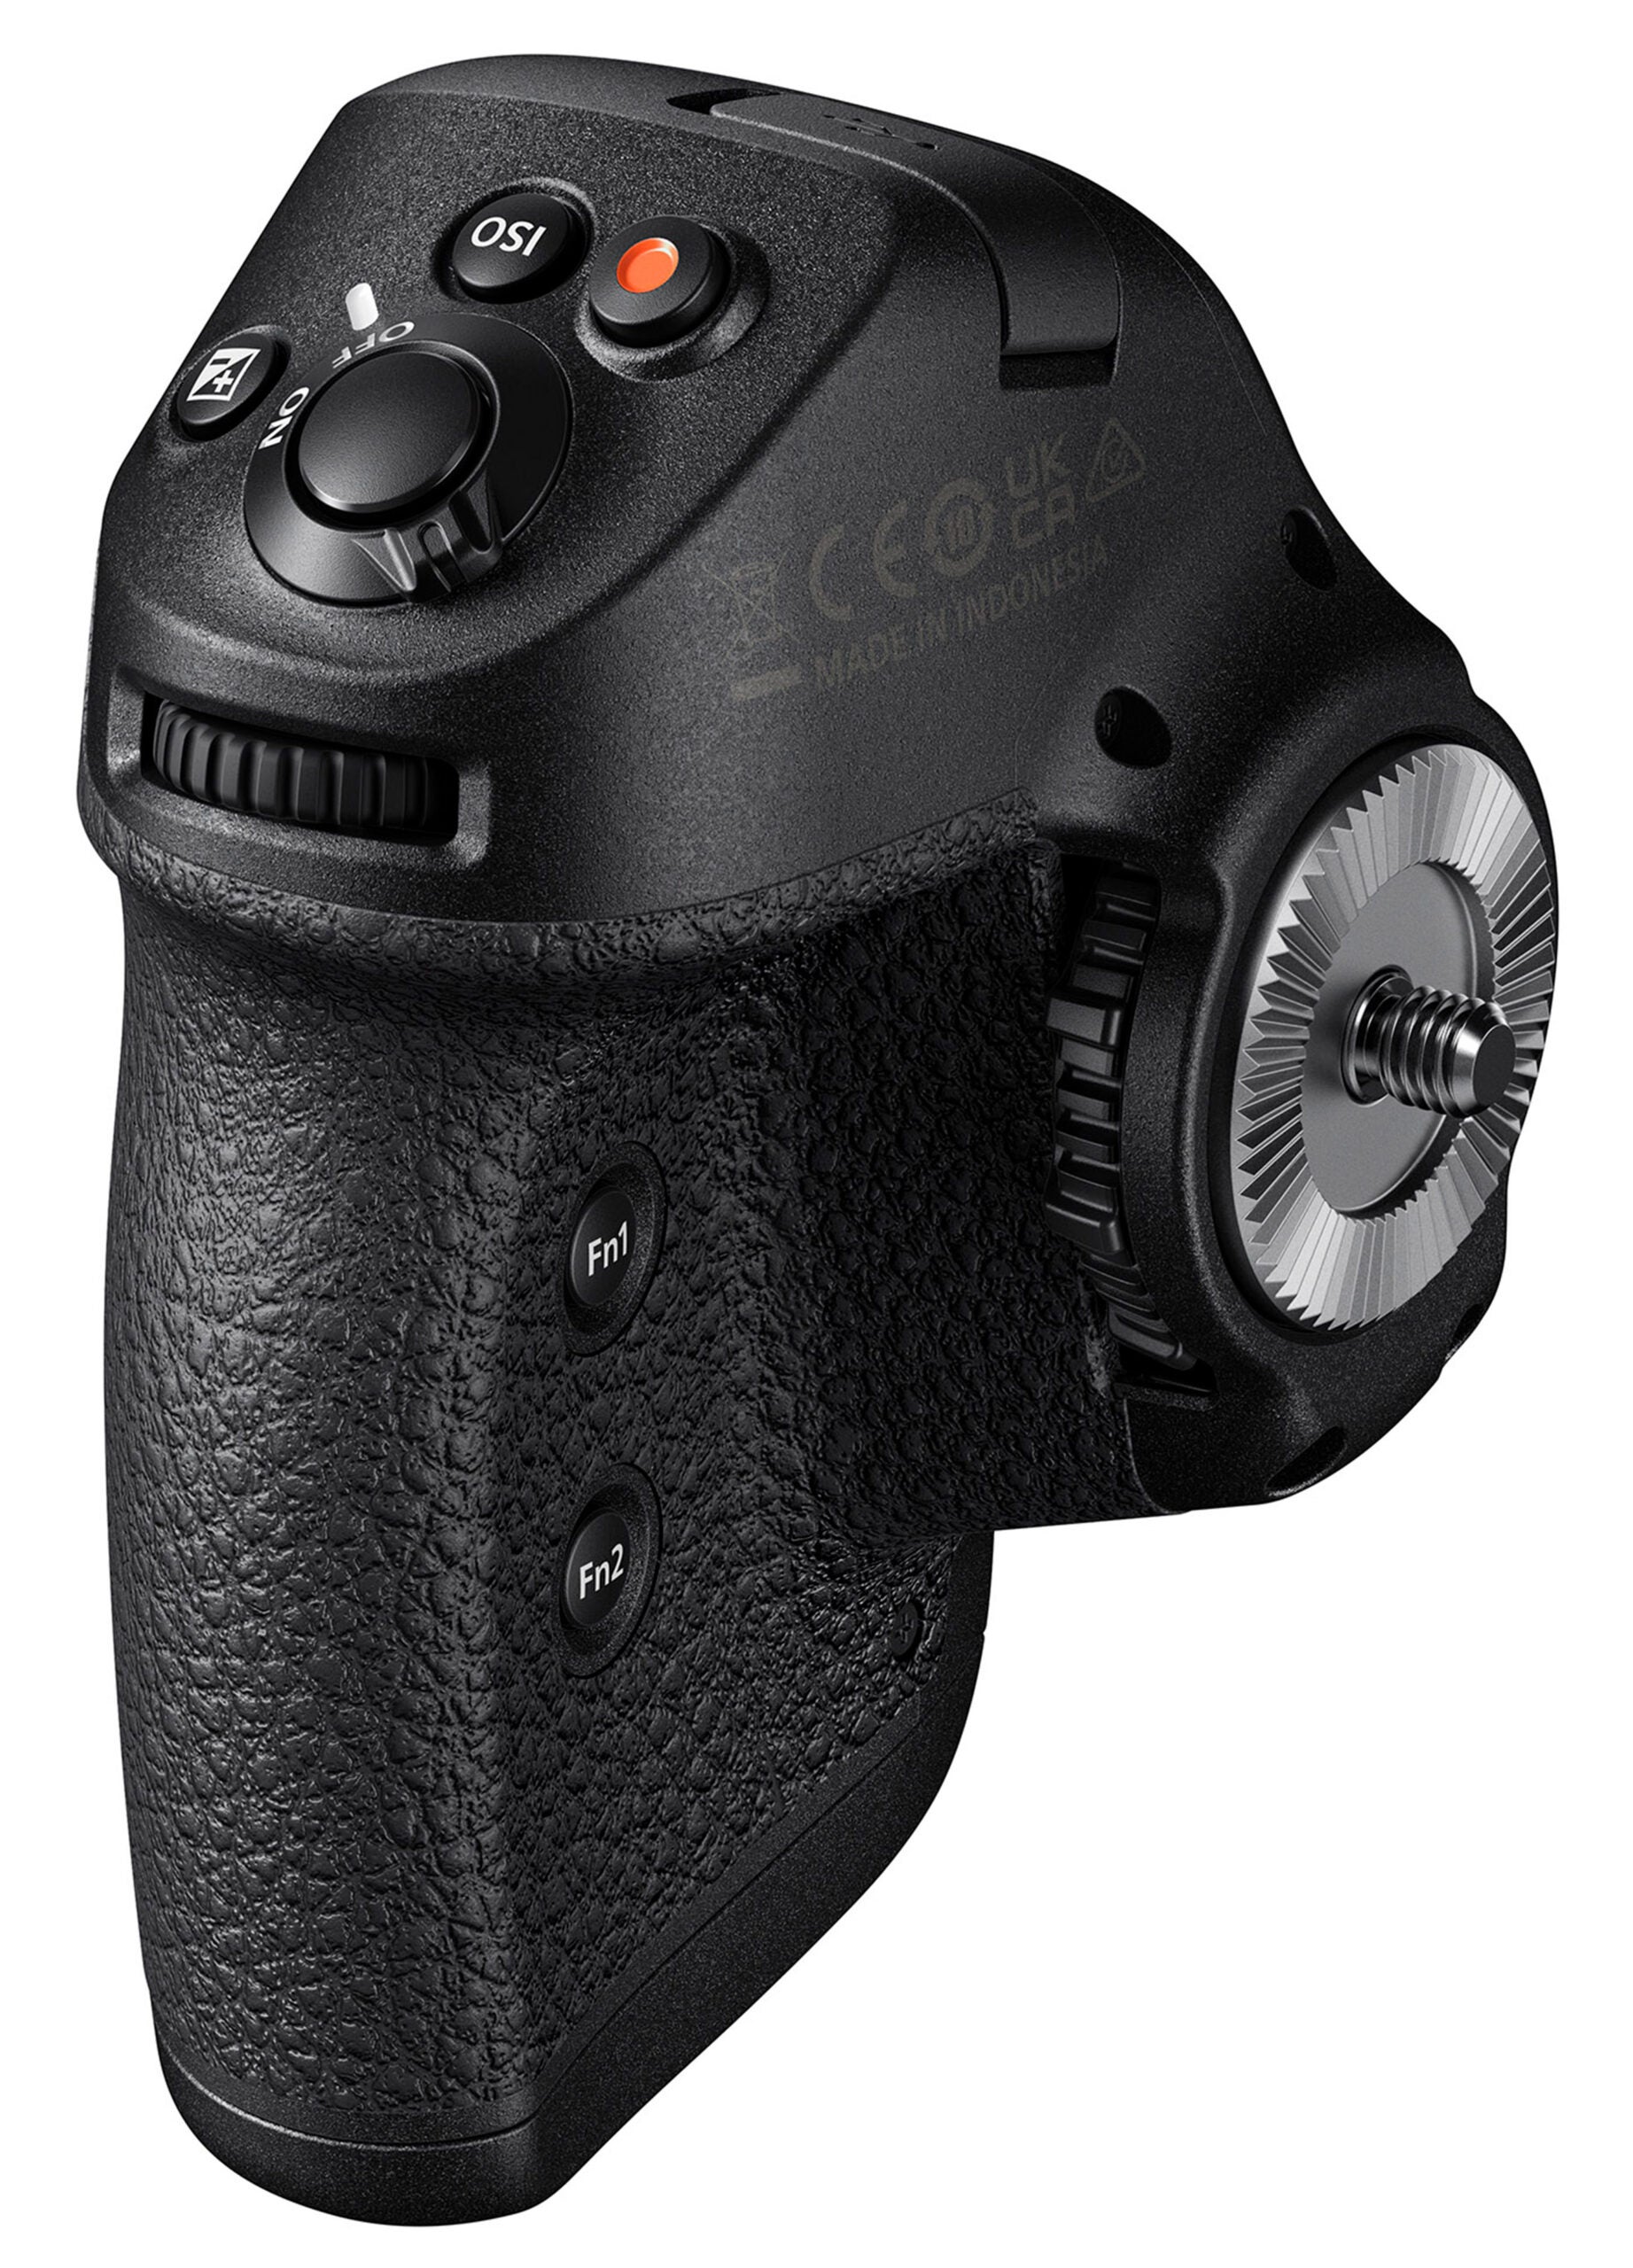 The Nikon MC-N10 remote grip is now in development for Z-mount cameras.